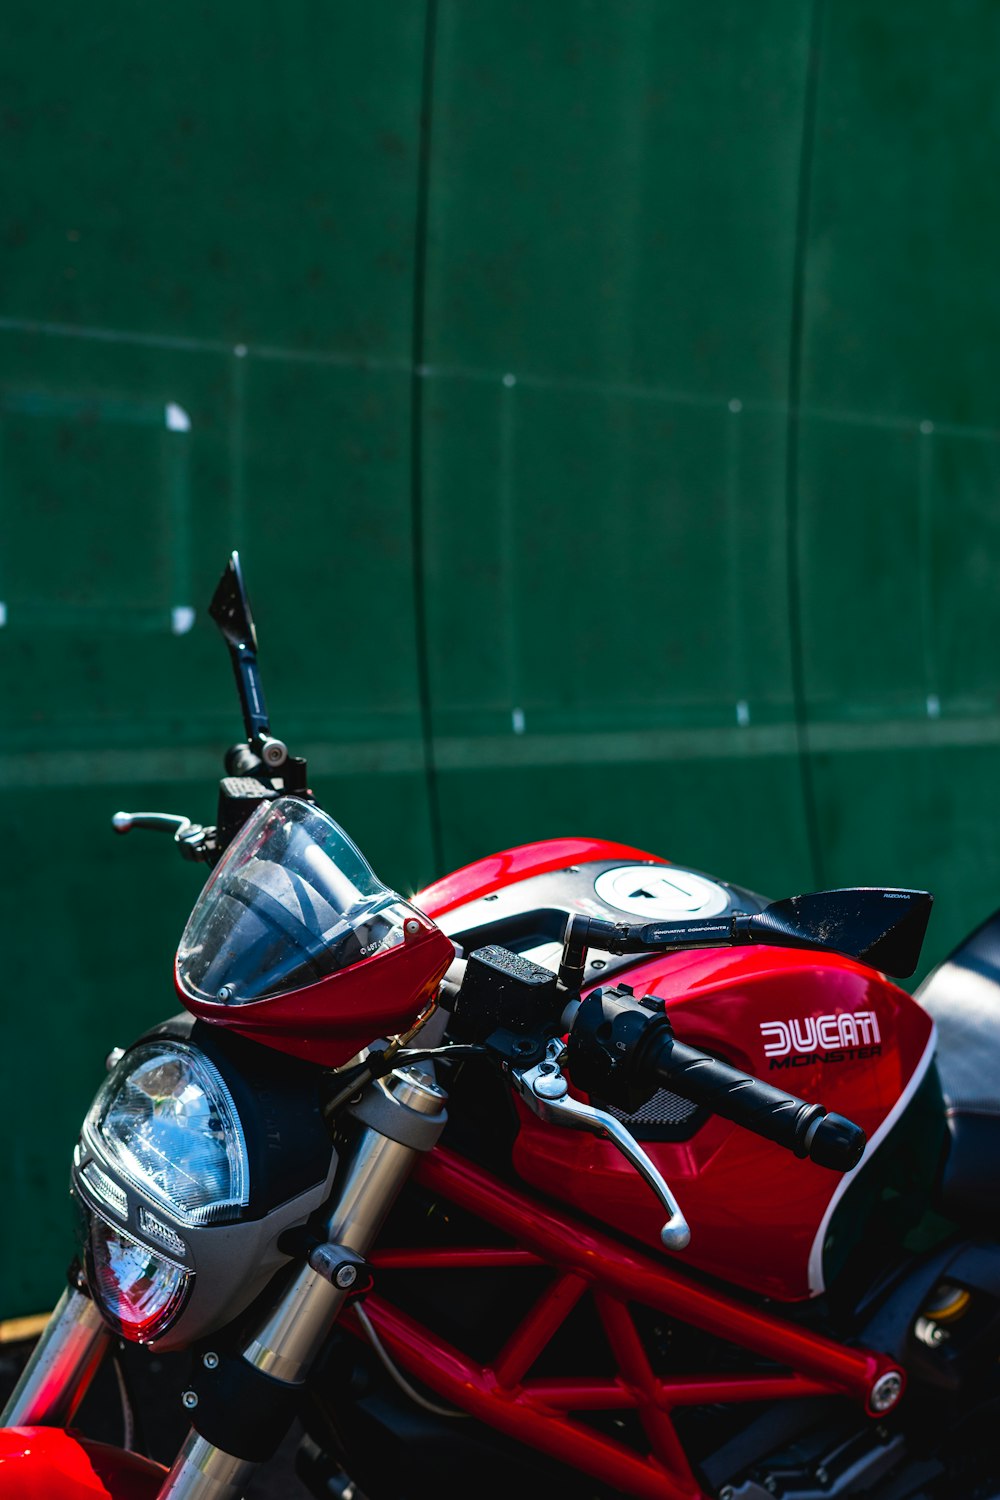 a red motorcycle parked in front of a green wall